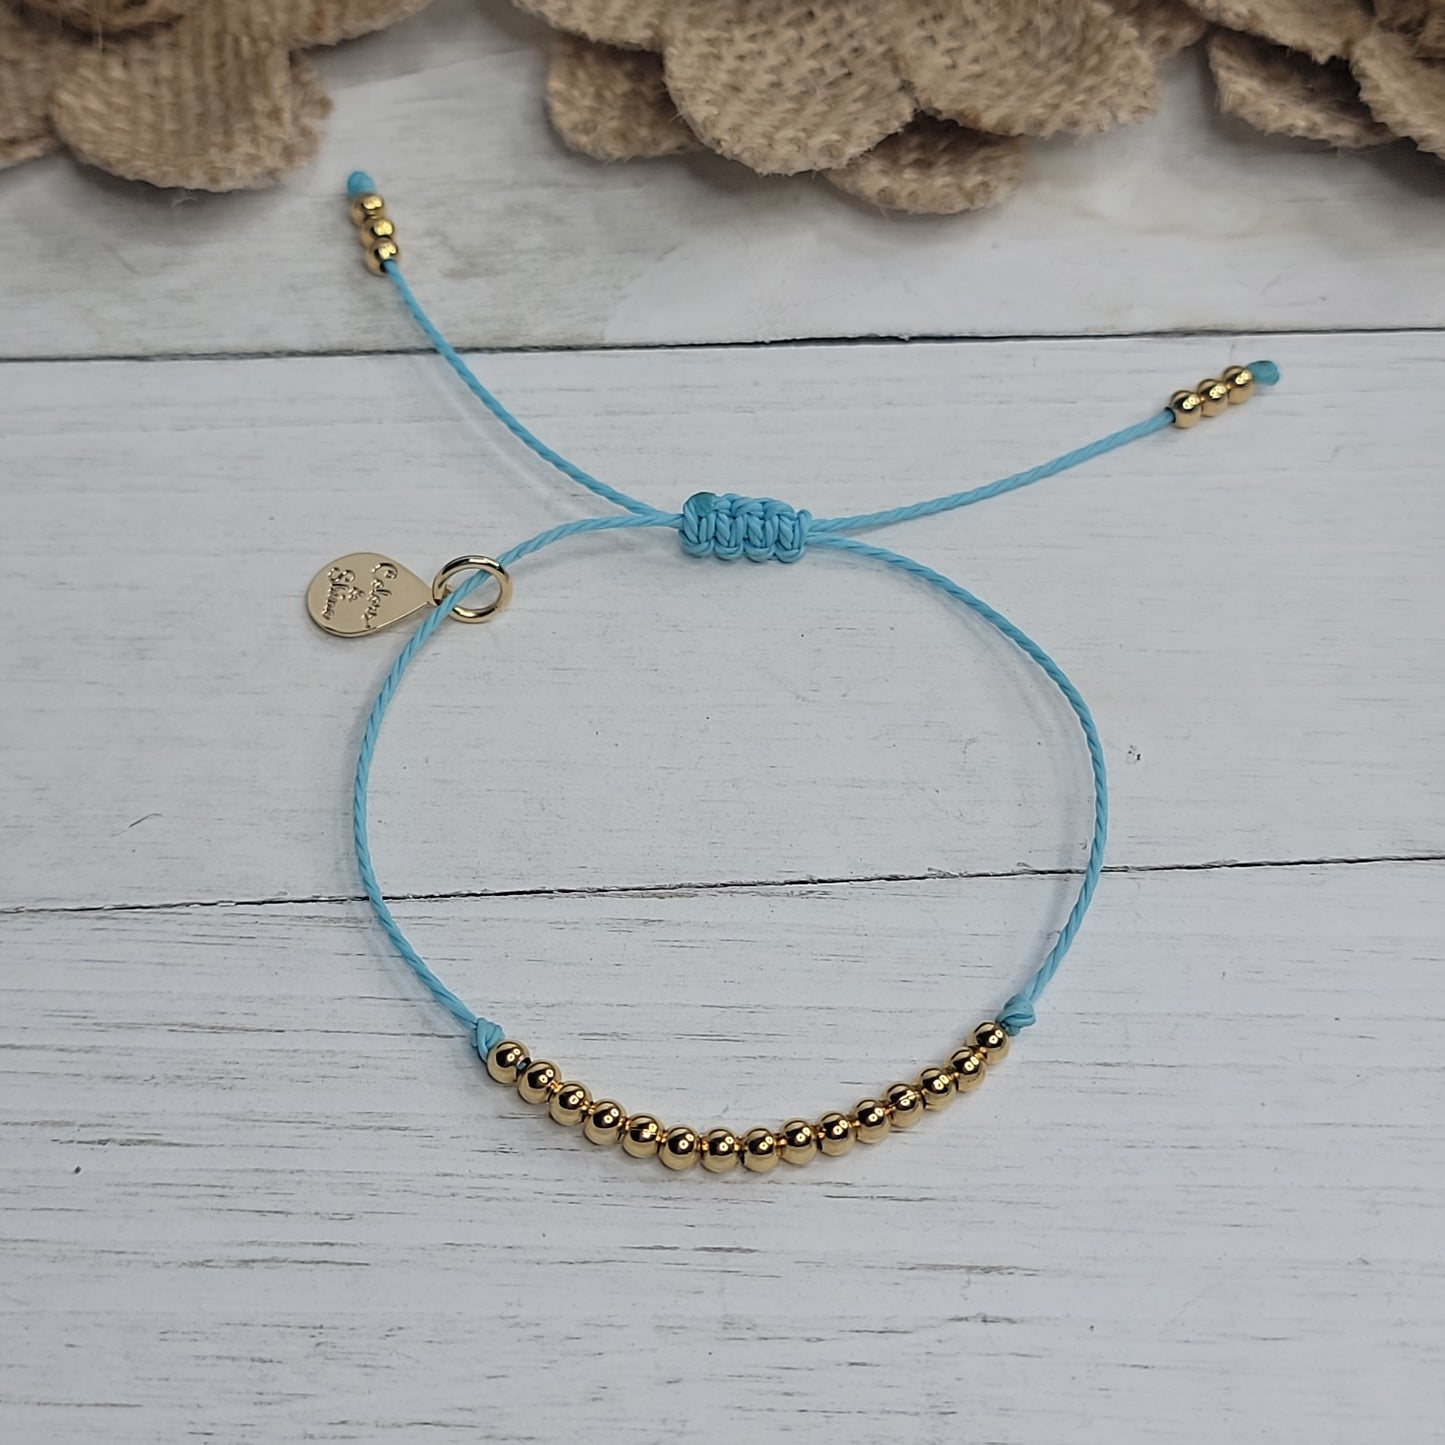 Adjustable Bracelet with Small Round 18k Gold-Filled Beads | Available in many Colors